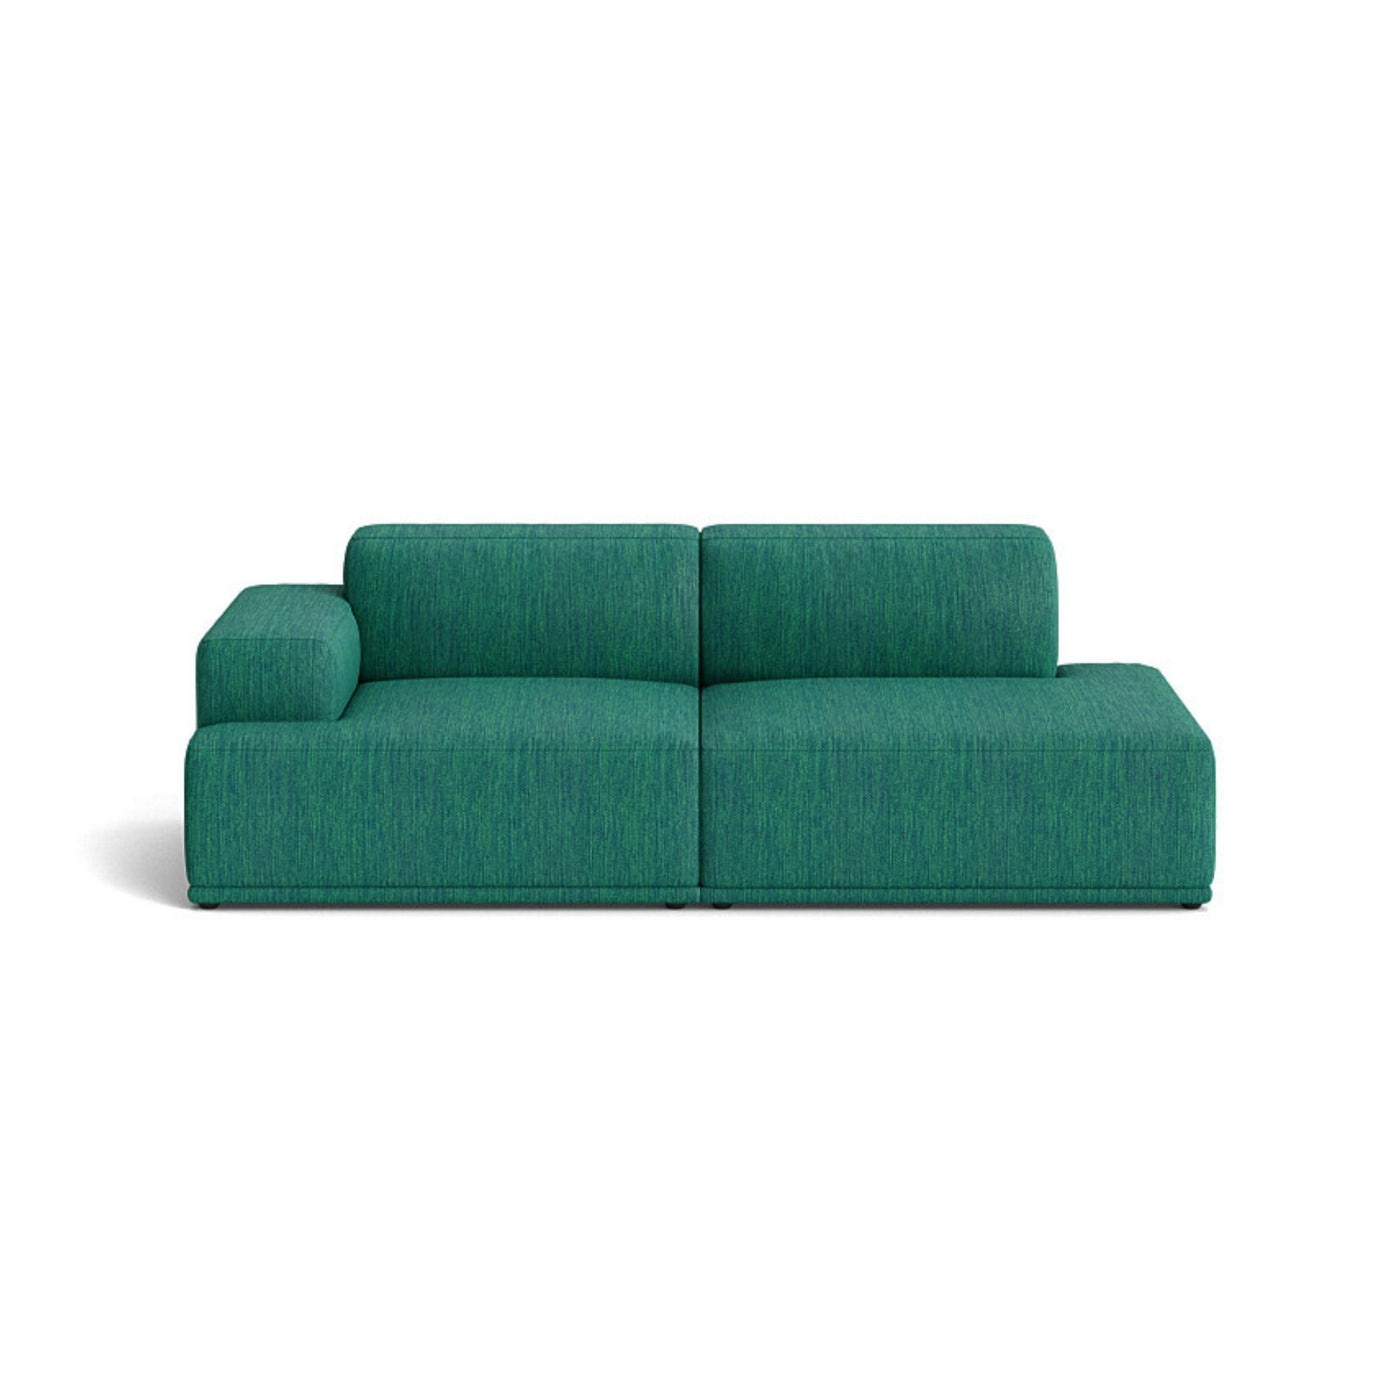 Muuto Connect Soft Modular 2 Seater Sofa, configuration 2. made-to-order from someday designs. #colour_balder-862